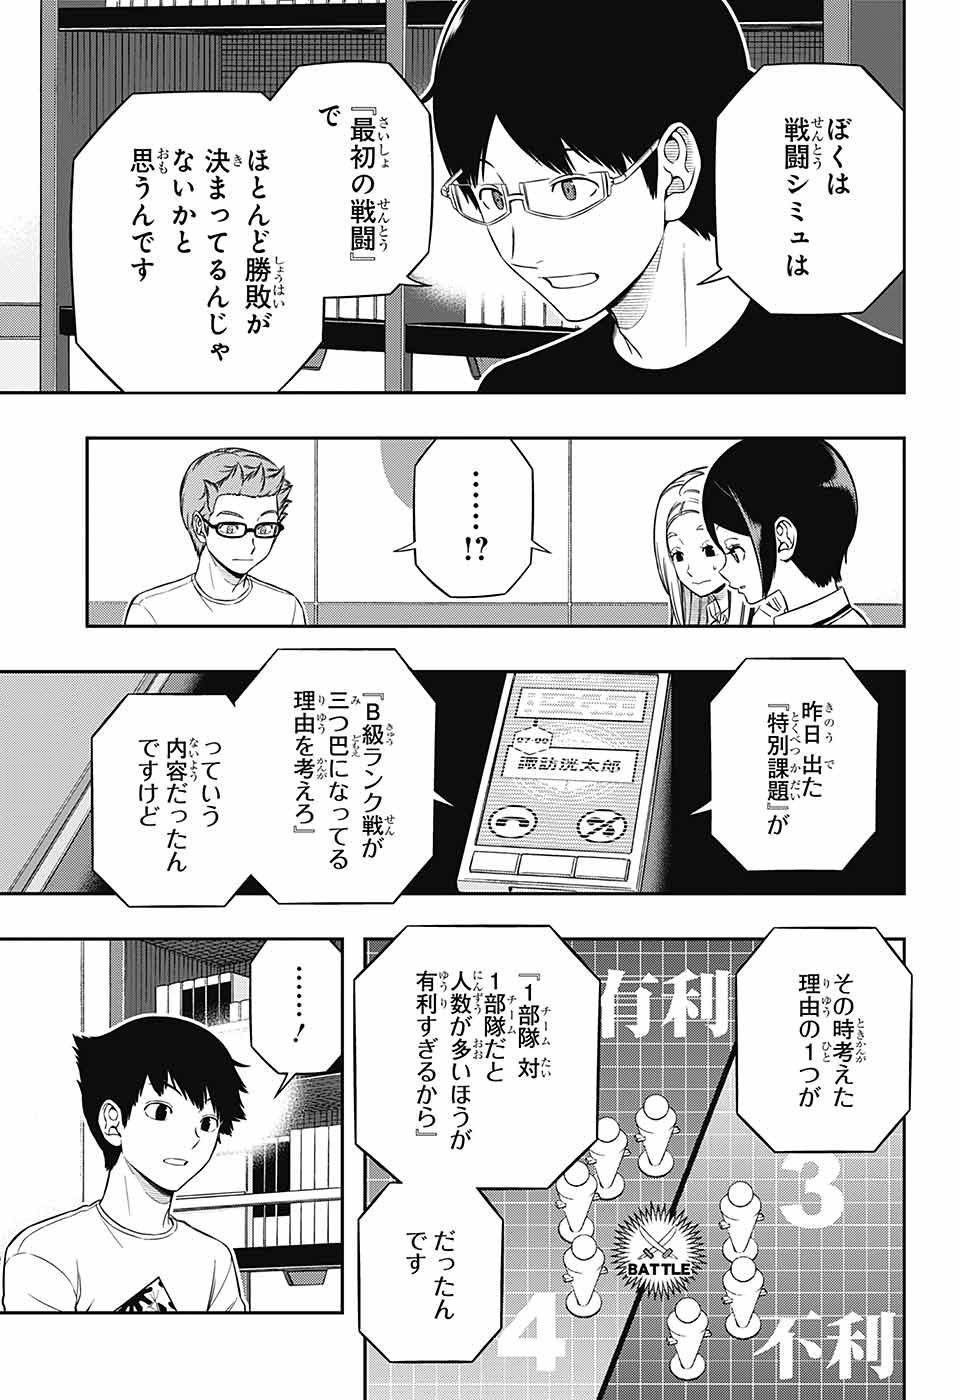 World Trigger - Chapter 227 - Page 3